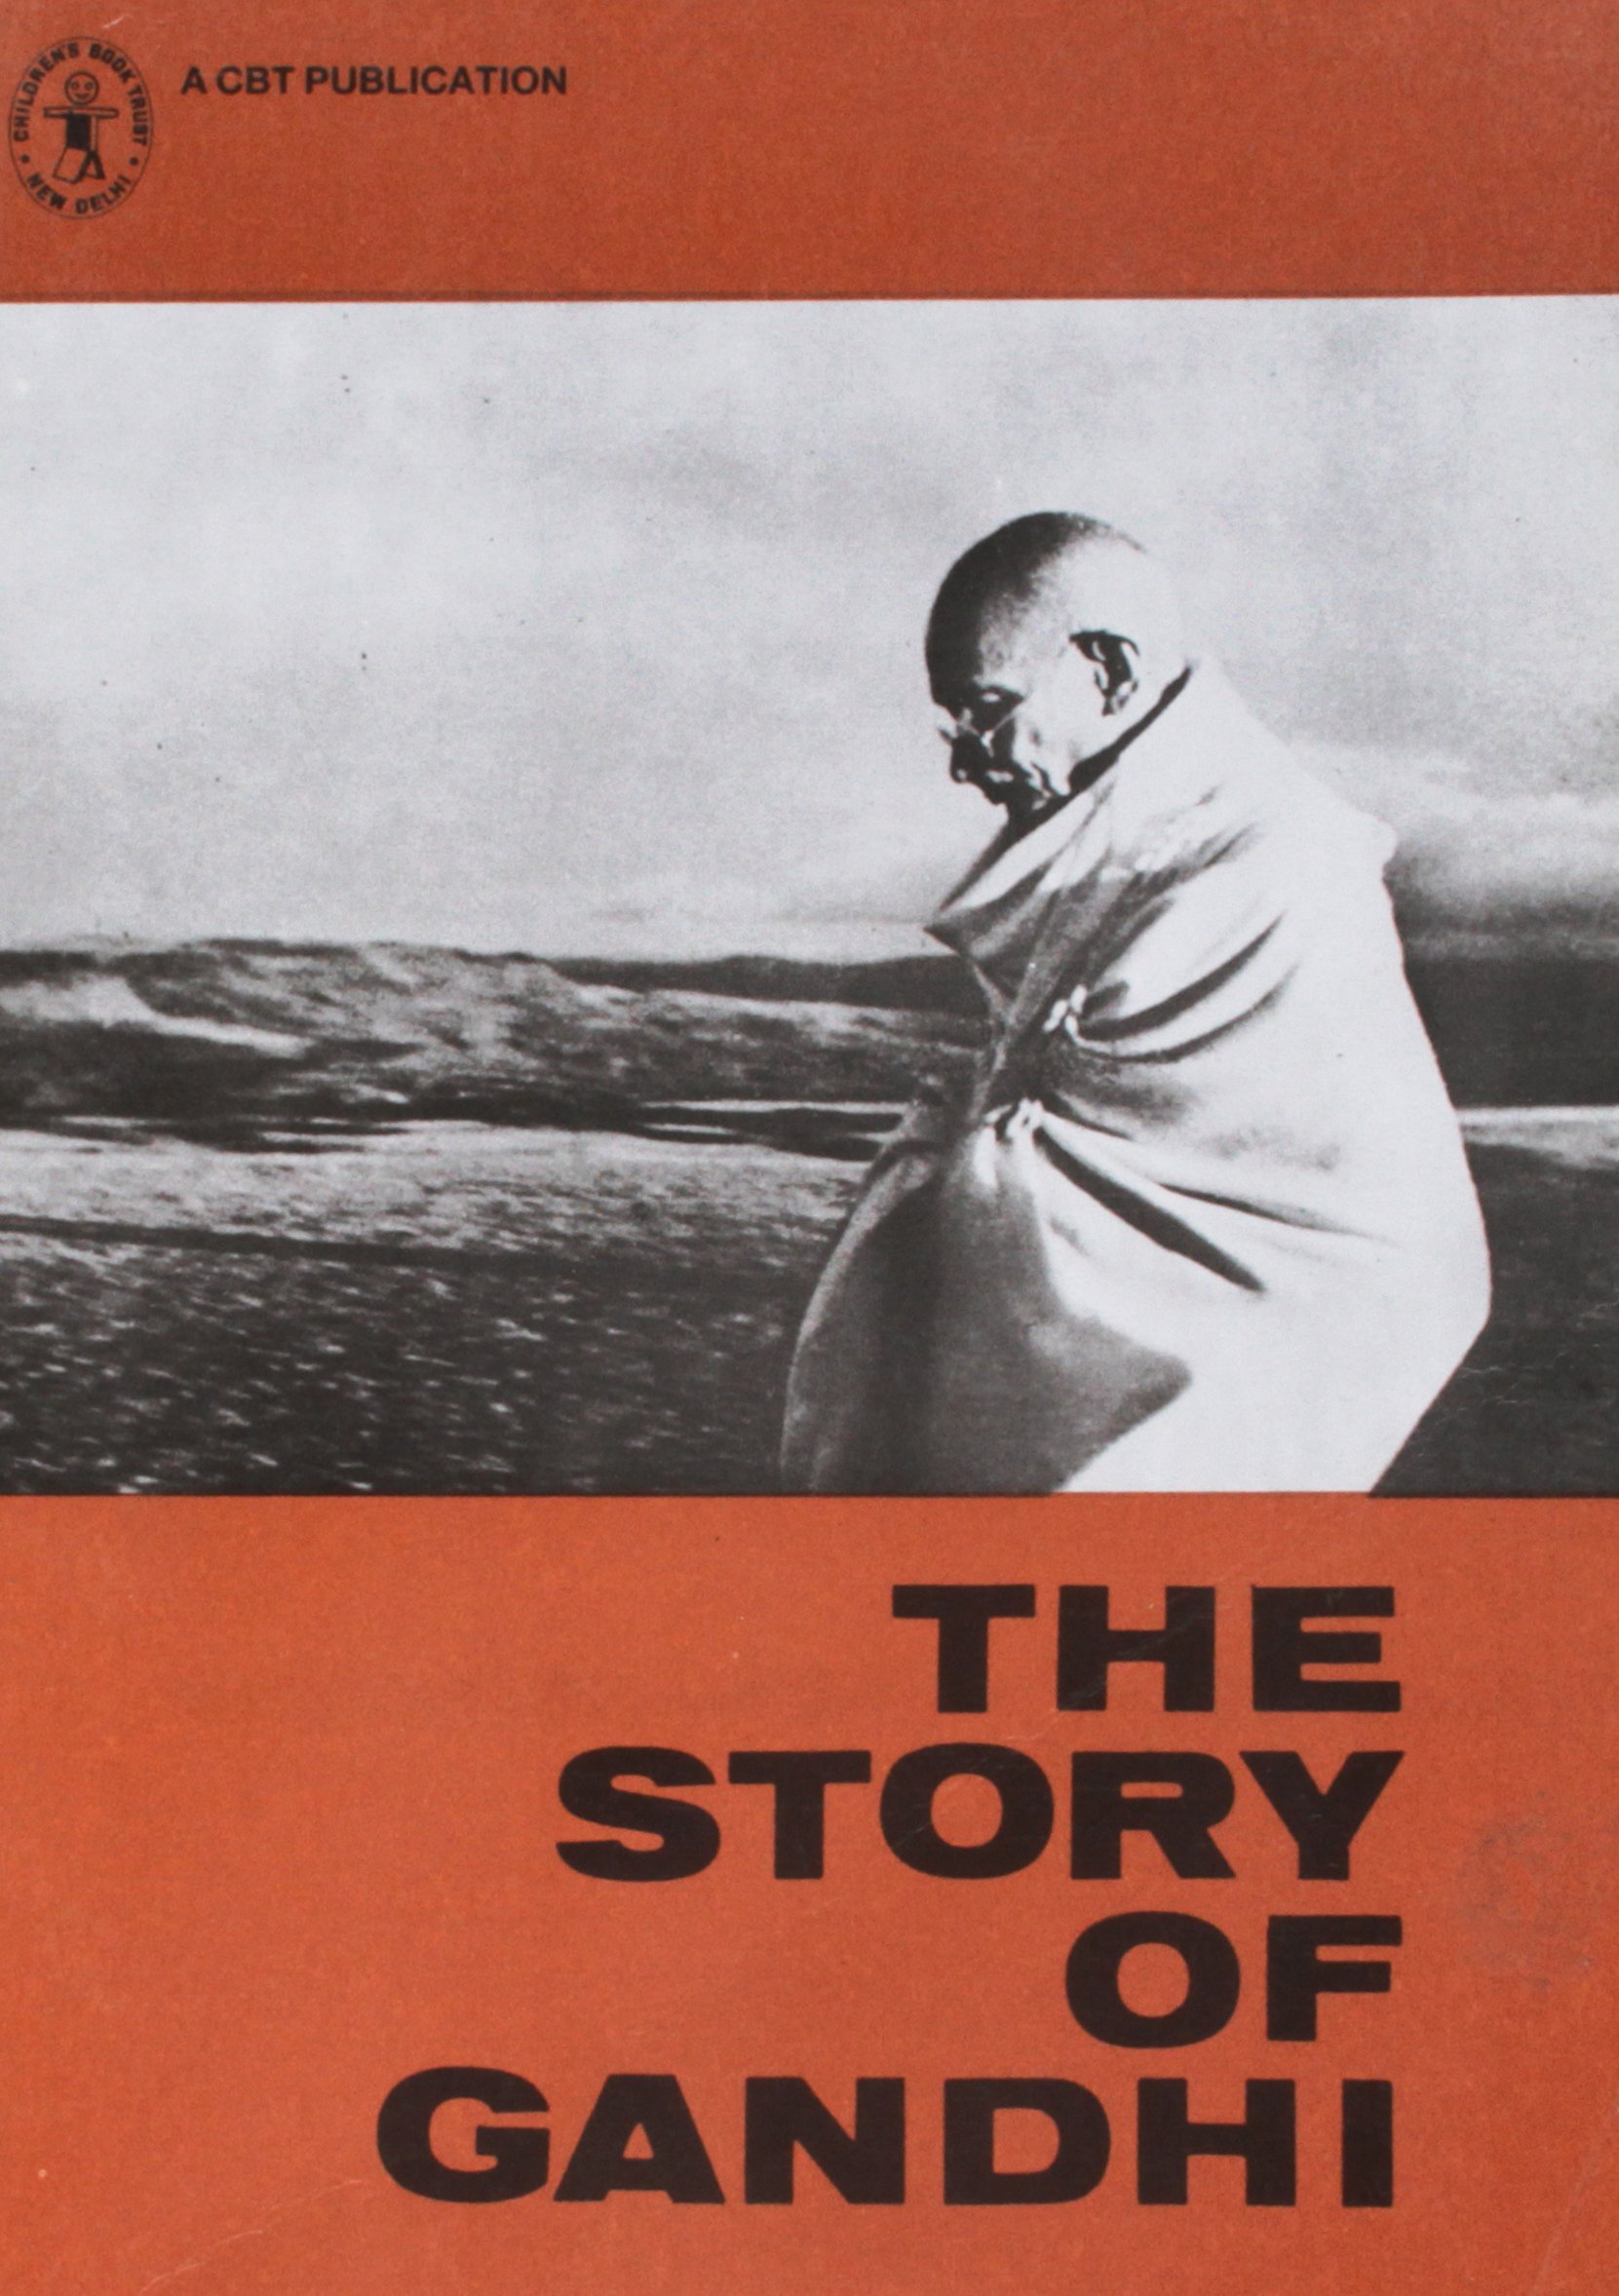 The Story of My Life book cover